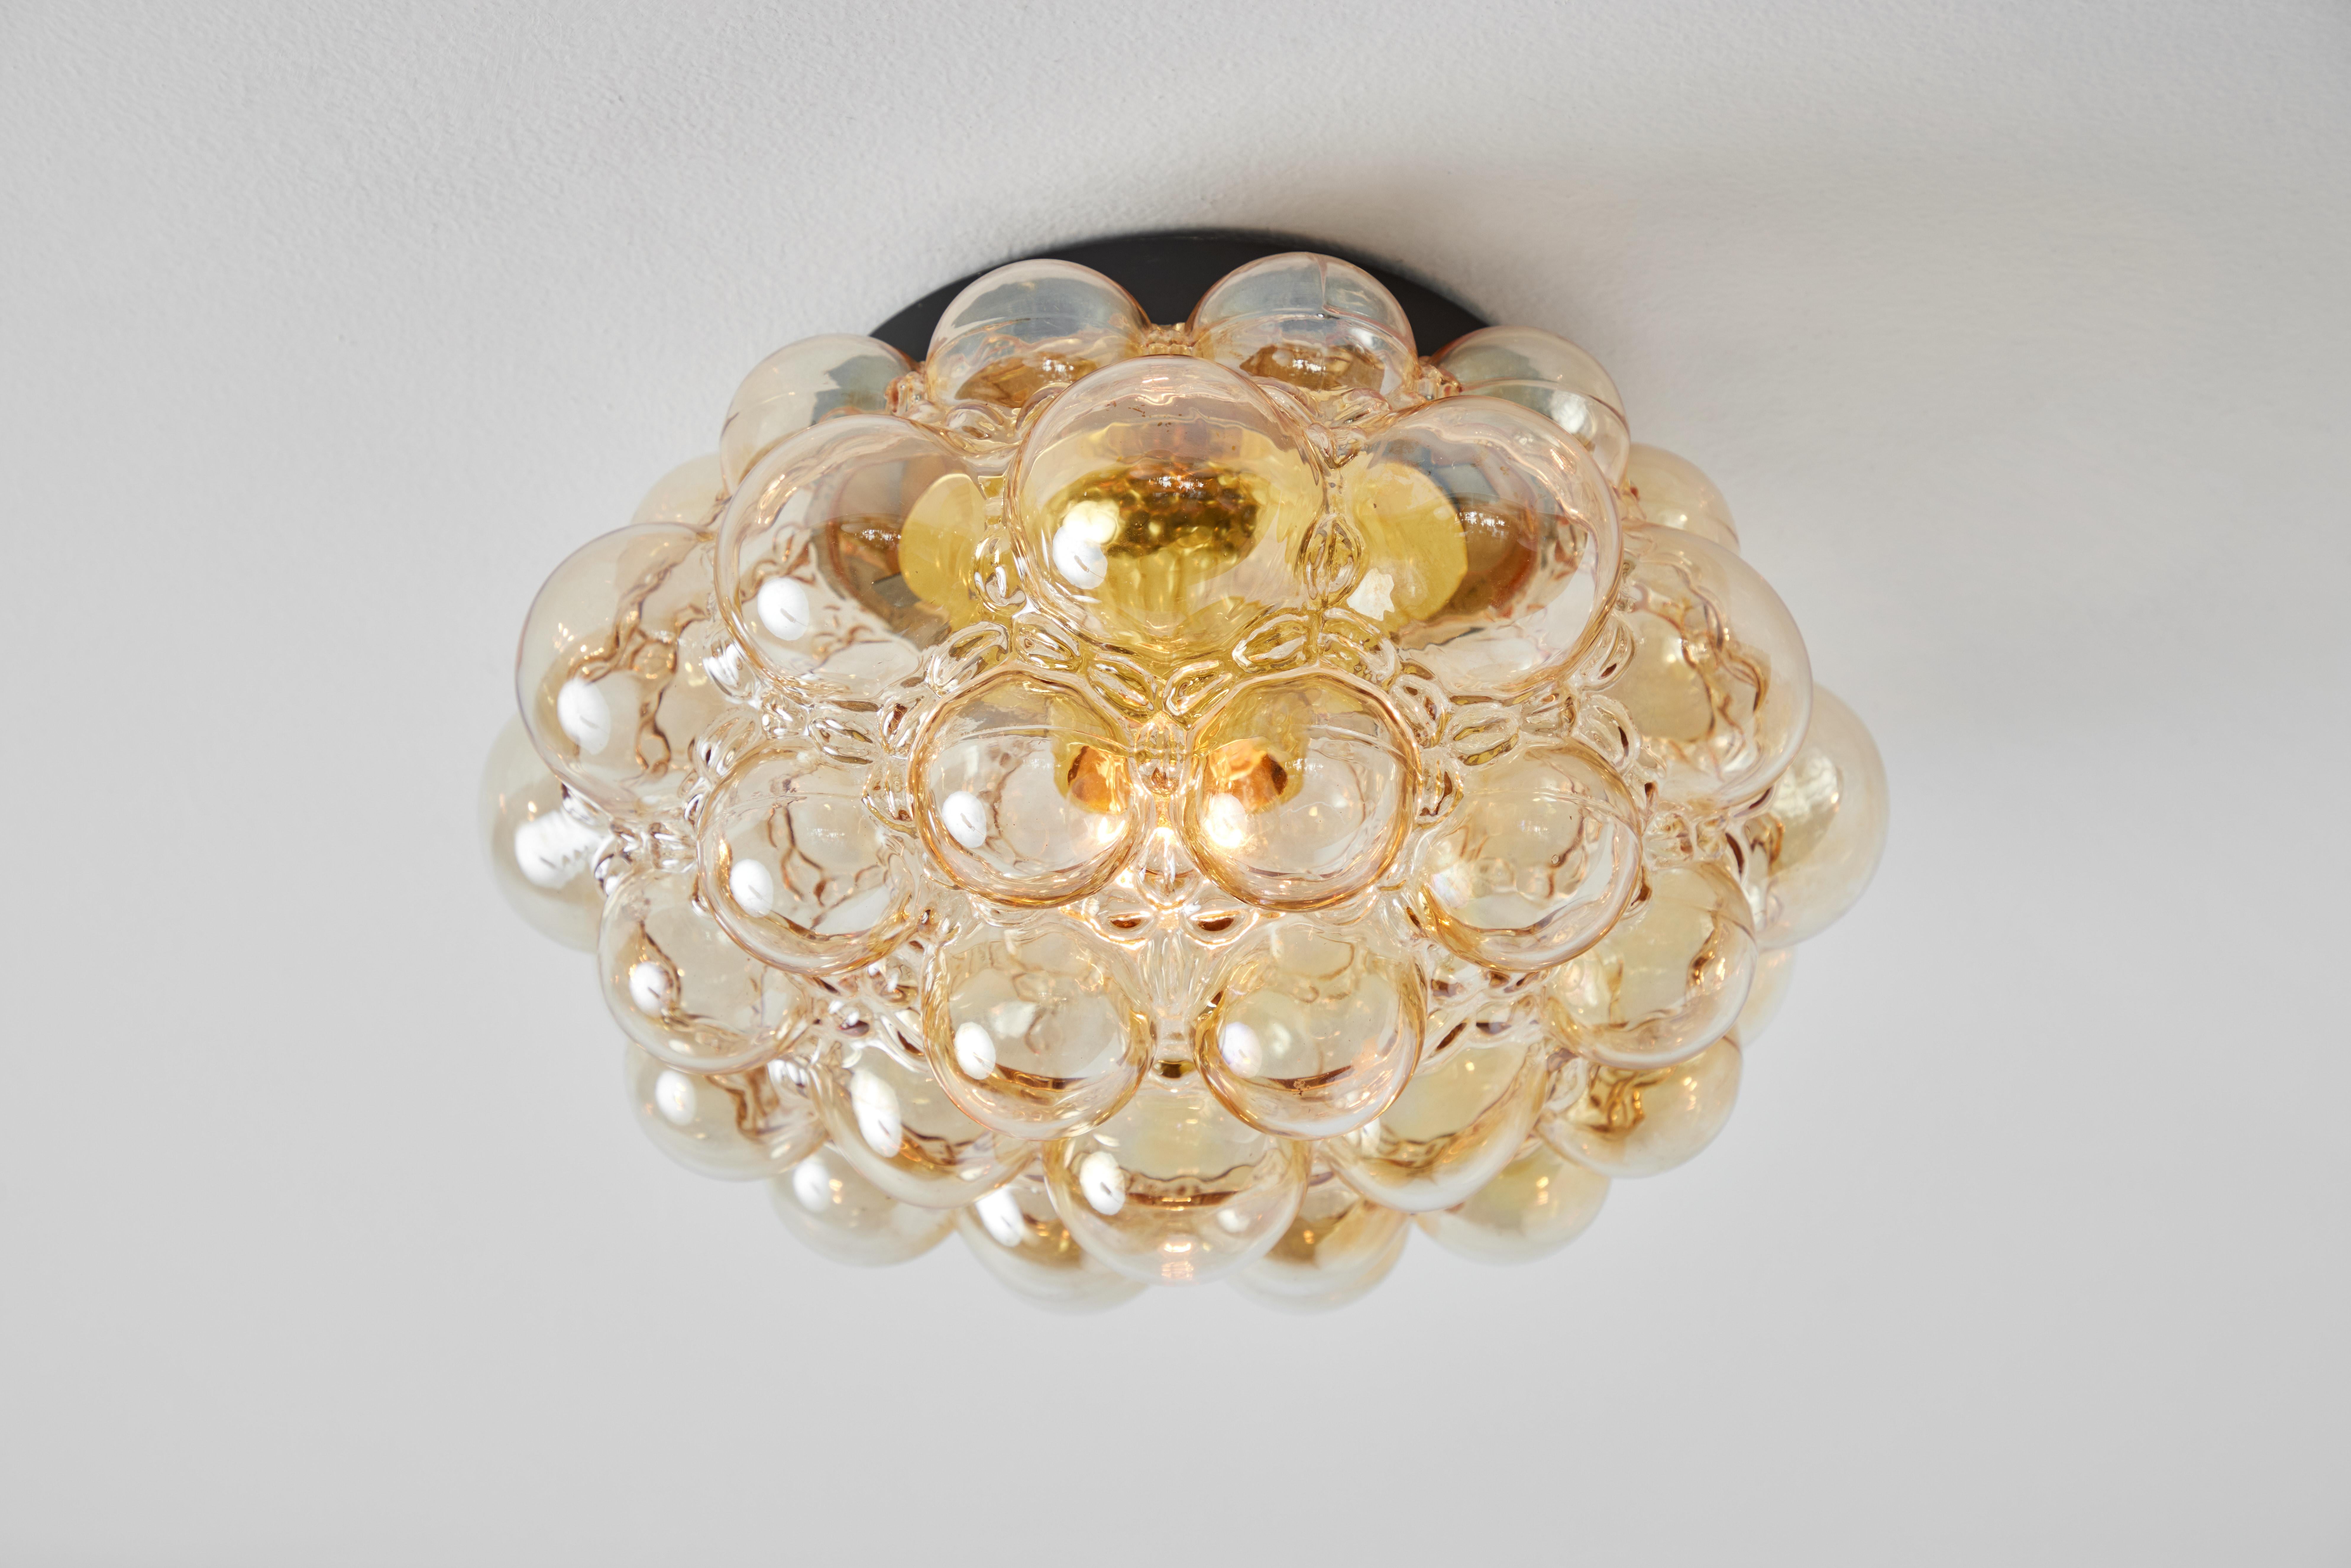 Large 1960s Helena Tynell model # A204 / 2045 amber bubble glass lamp for Limburg. Executed in thick and heavy textured amber bubble glass and painted metal mount. Can be mounted on the ceiling or used as a wall lamp. Fabricated in Limburg, Germany